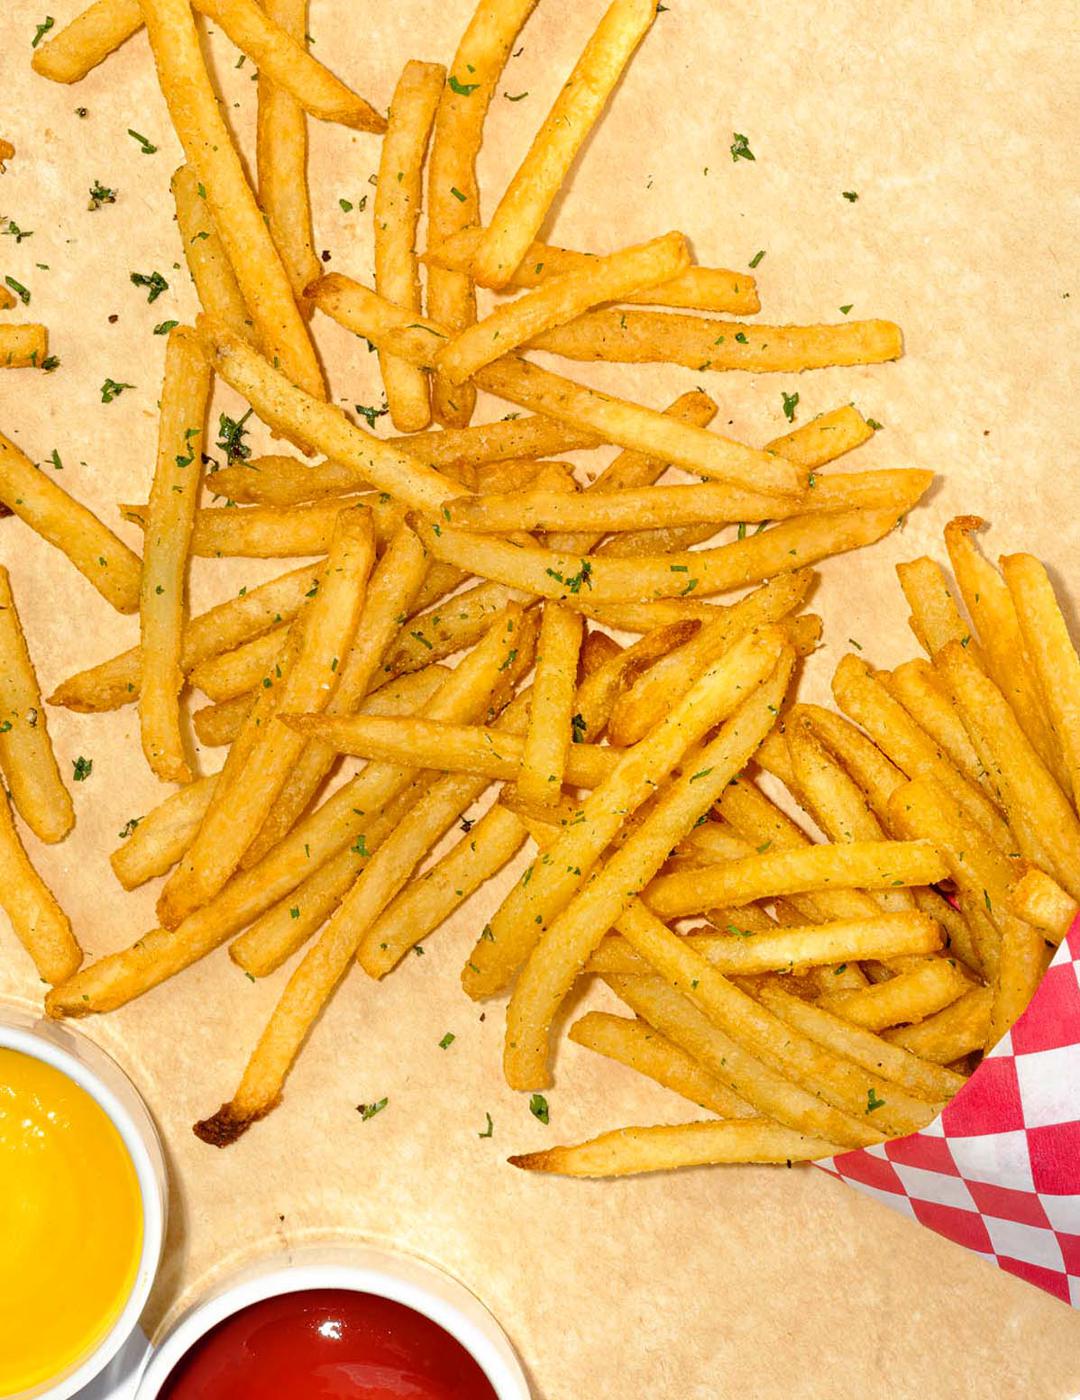 Air-Fried French Fries, From Frozen to Golden